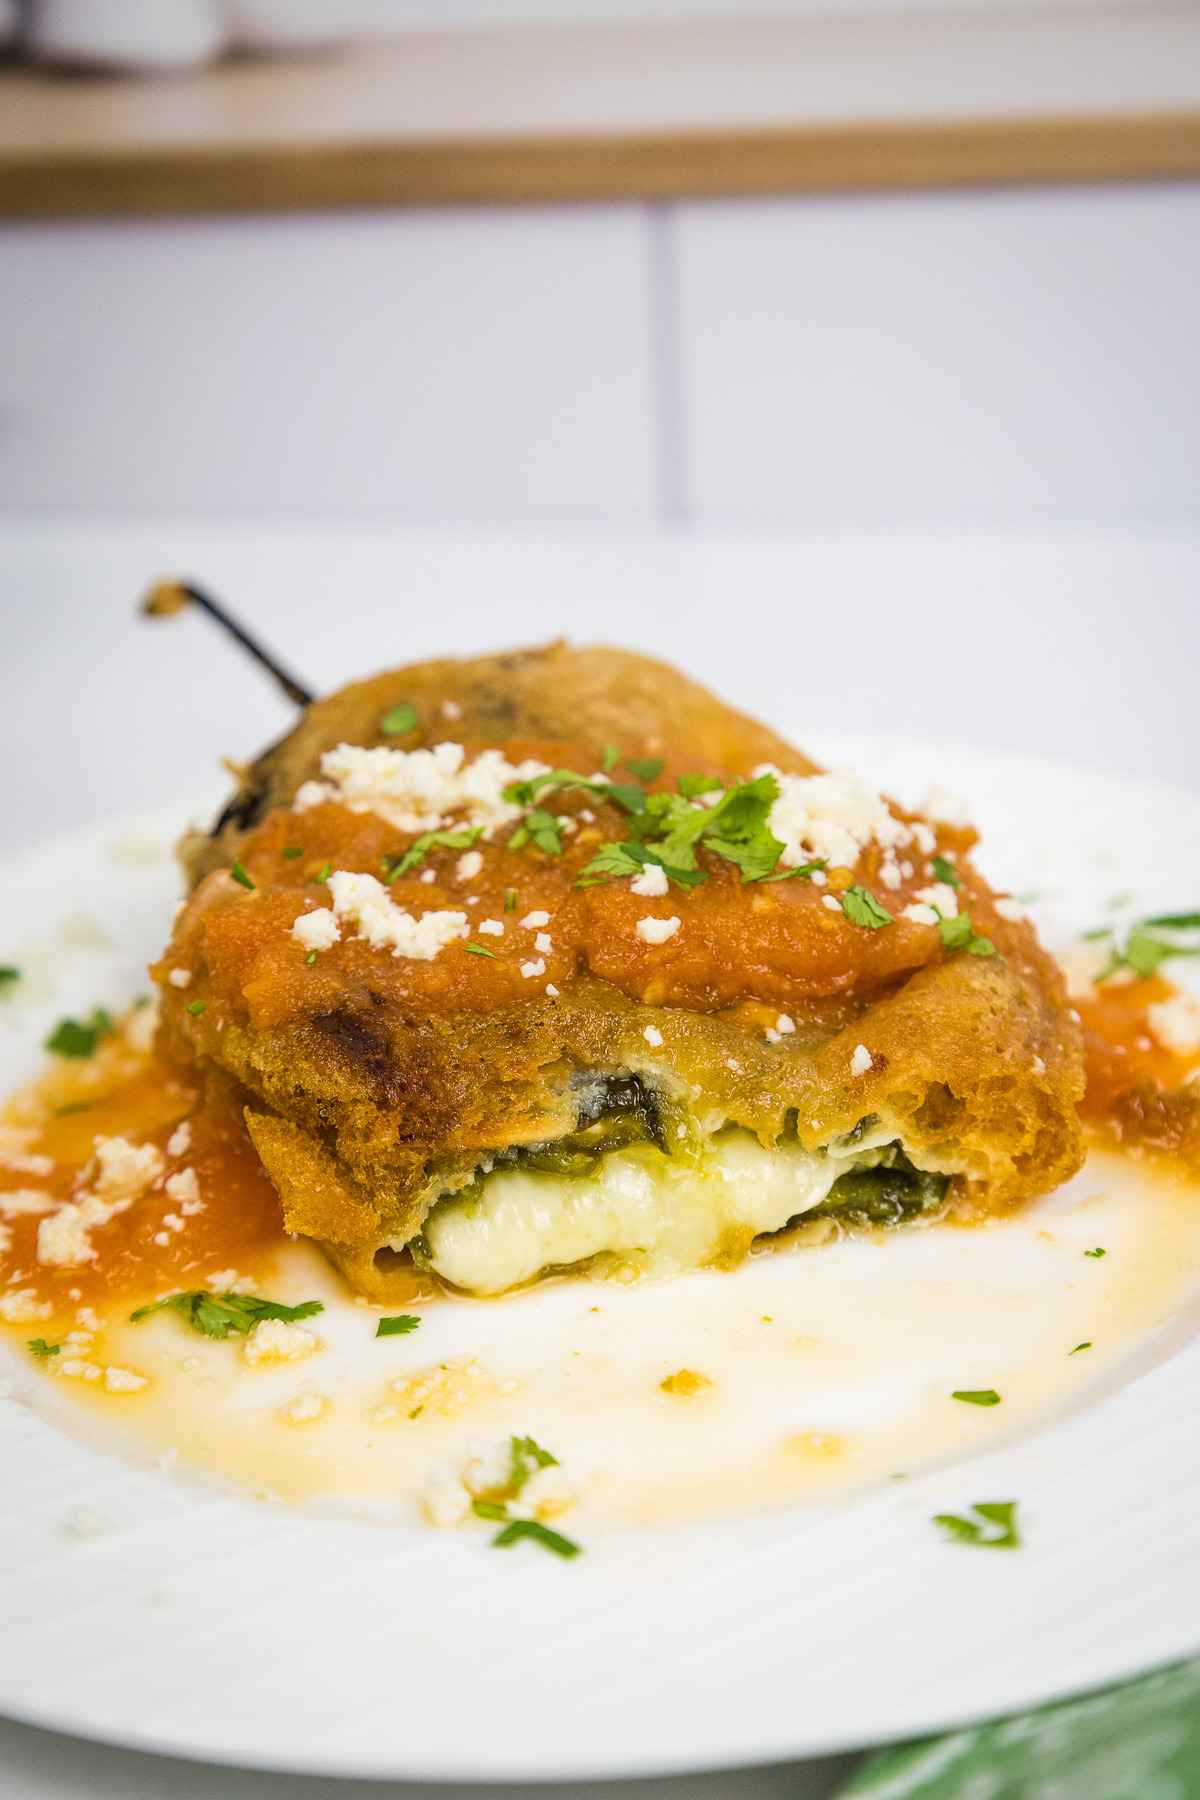 Chile Relleno on a plate with a portion cut from the chile and cheese oozing out.